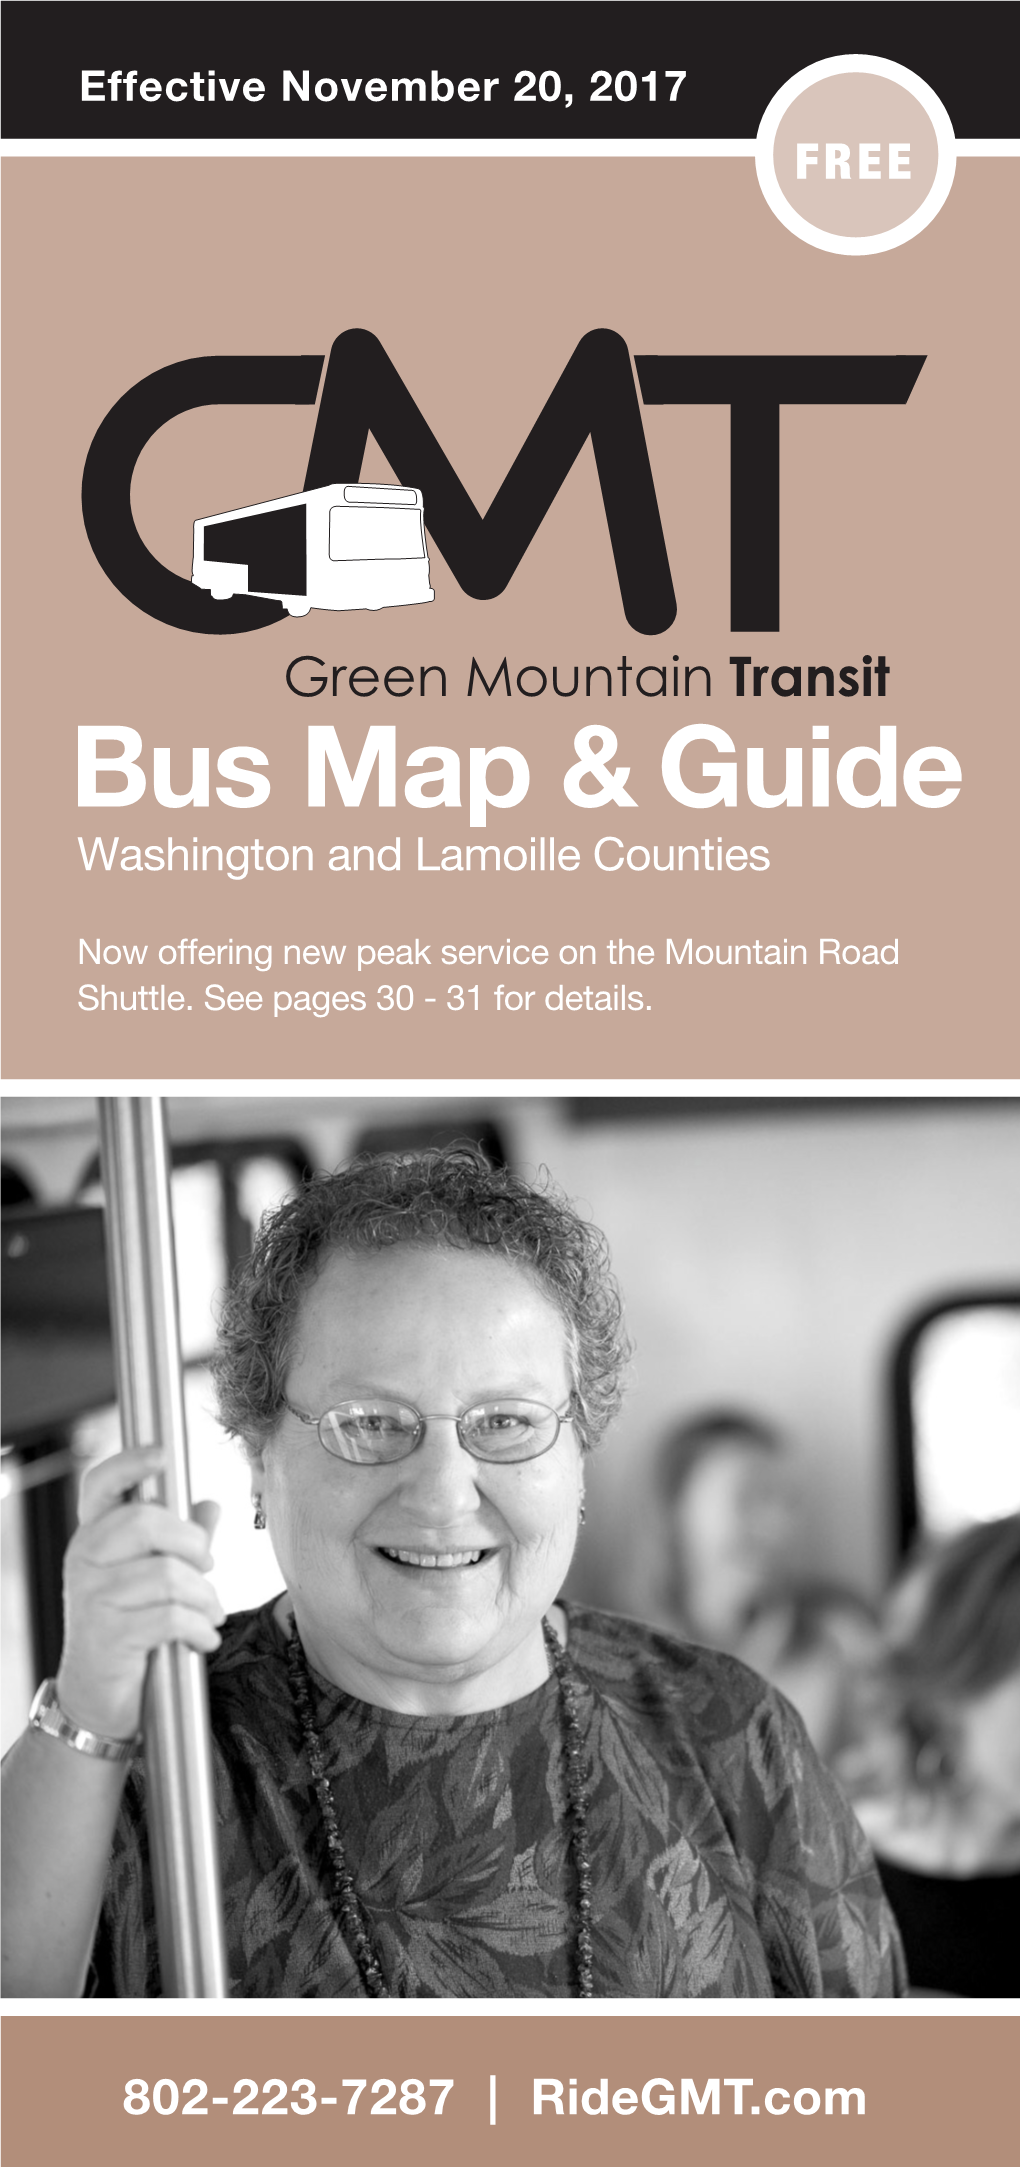 Washington and Lamoille Counties Bus Map & Guide